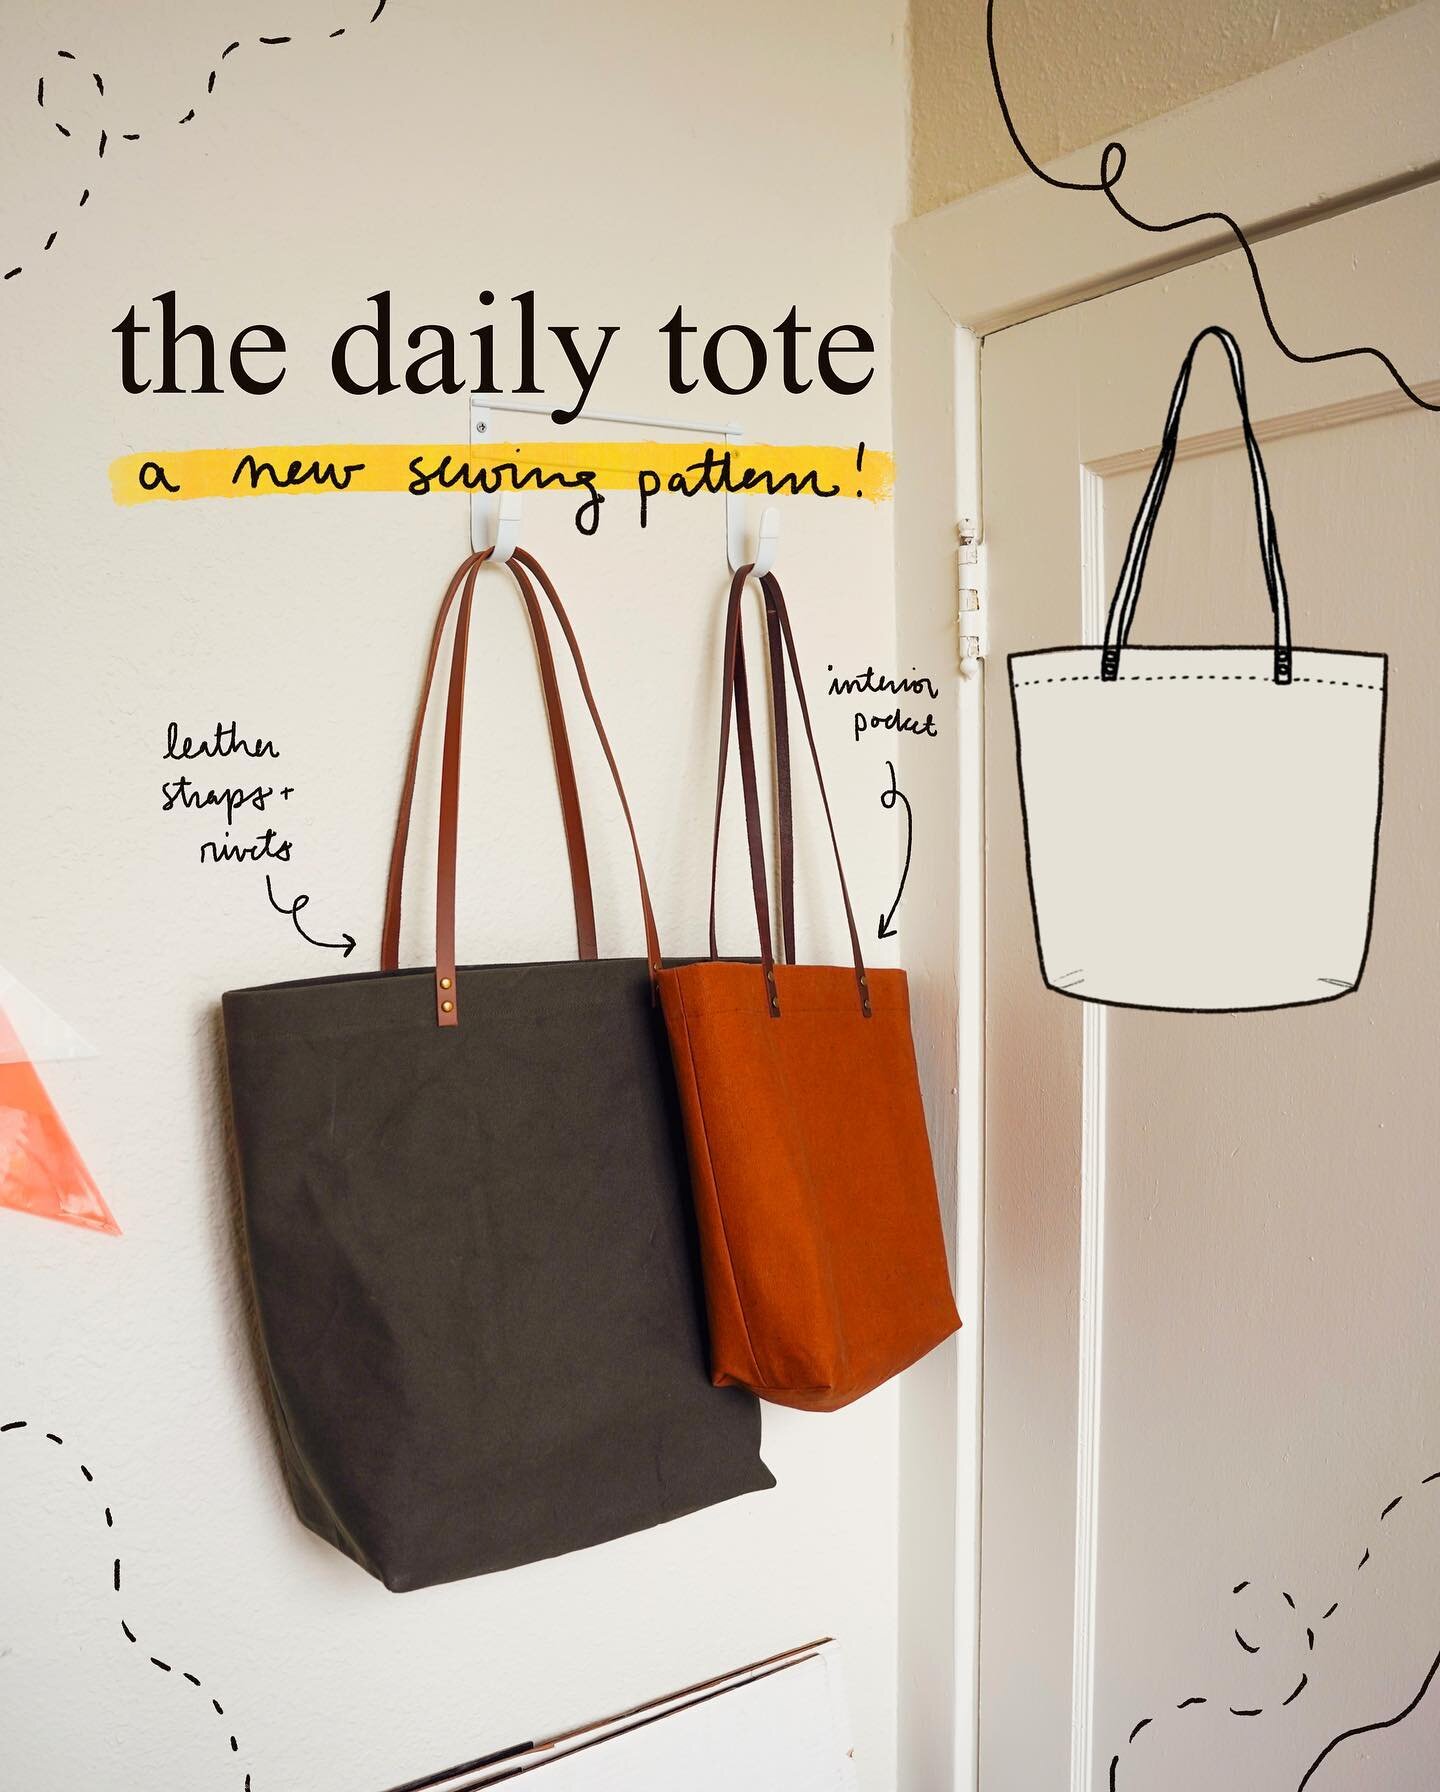 ✨Two days left to pre order HOW TO SEW CLOTHES and get our brand new PDF sewing pattern, the DAILY TOTE, as a thank you! ✨

The delight of the Daily Tote pattern is the elevated details (leather straps! rivets! thoughtful proportions!) mixed with the